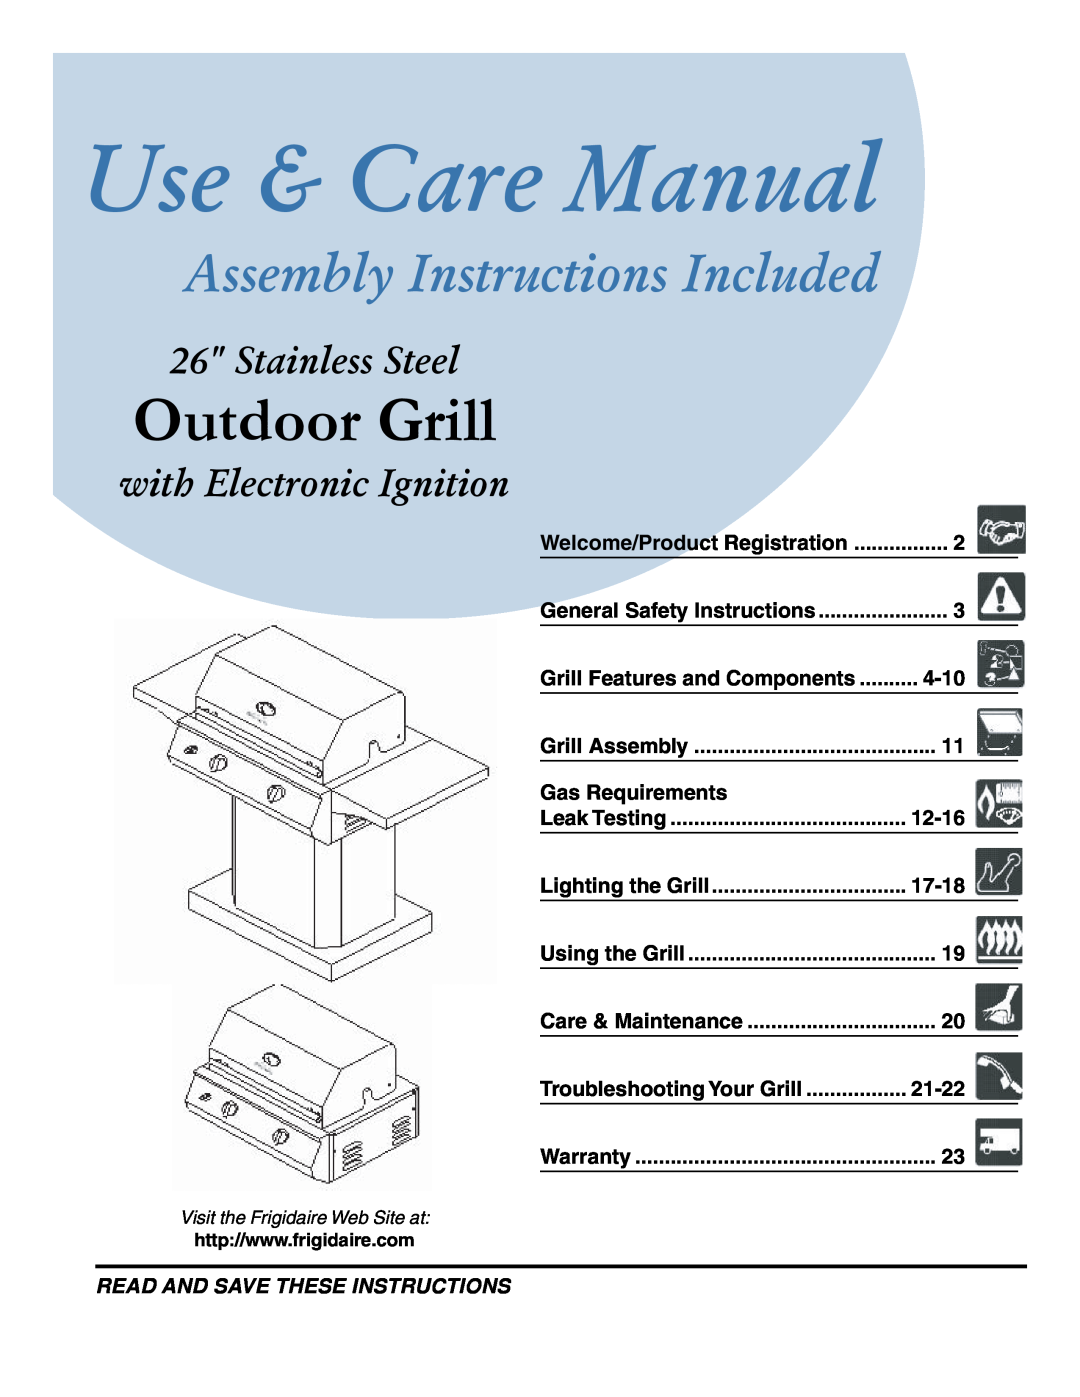 Frigidaire 26" Stainless Steel Outdoor Grill warranty Use & Care Manual, Assembly Instructions Included 